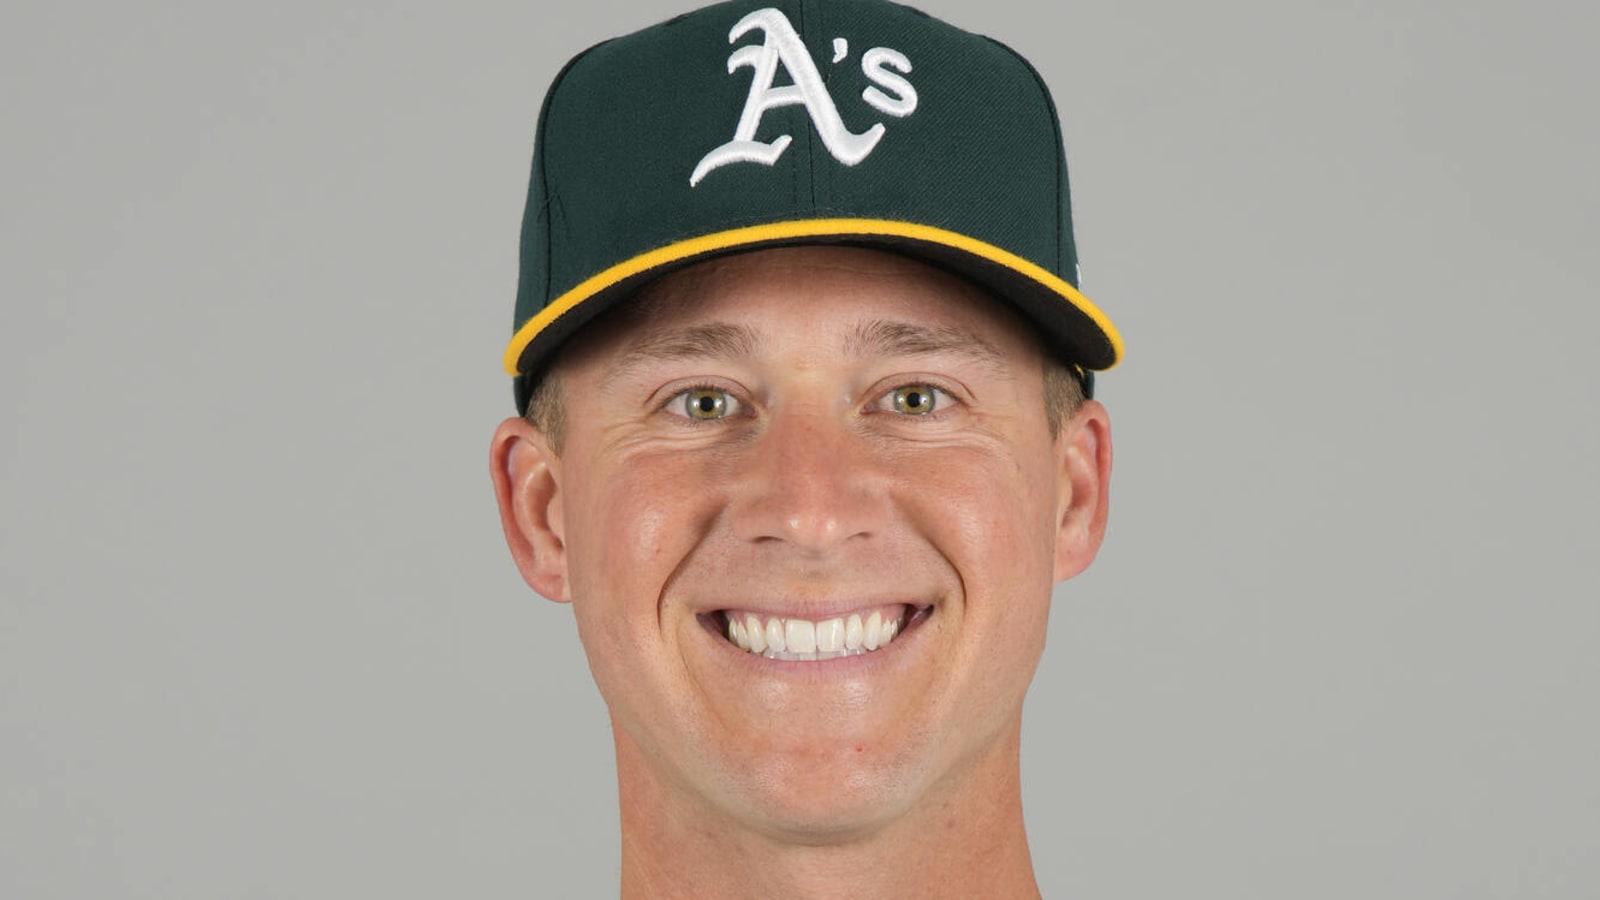 Athletics lose veteran reliever to Tommy John surgery